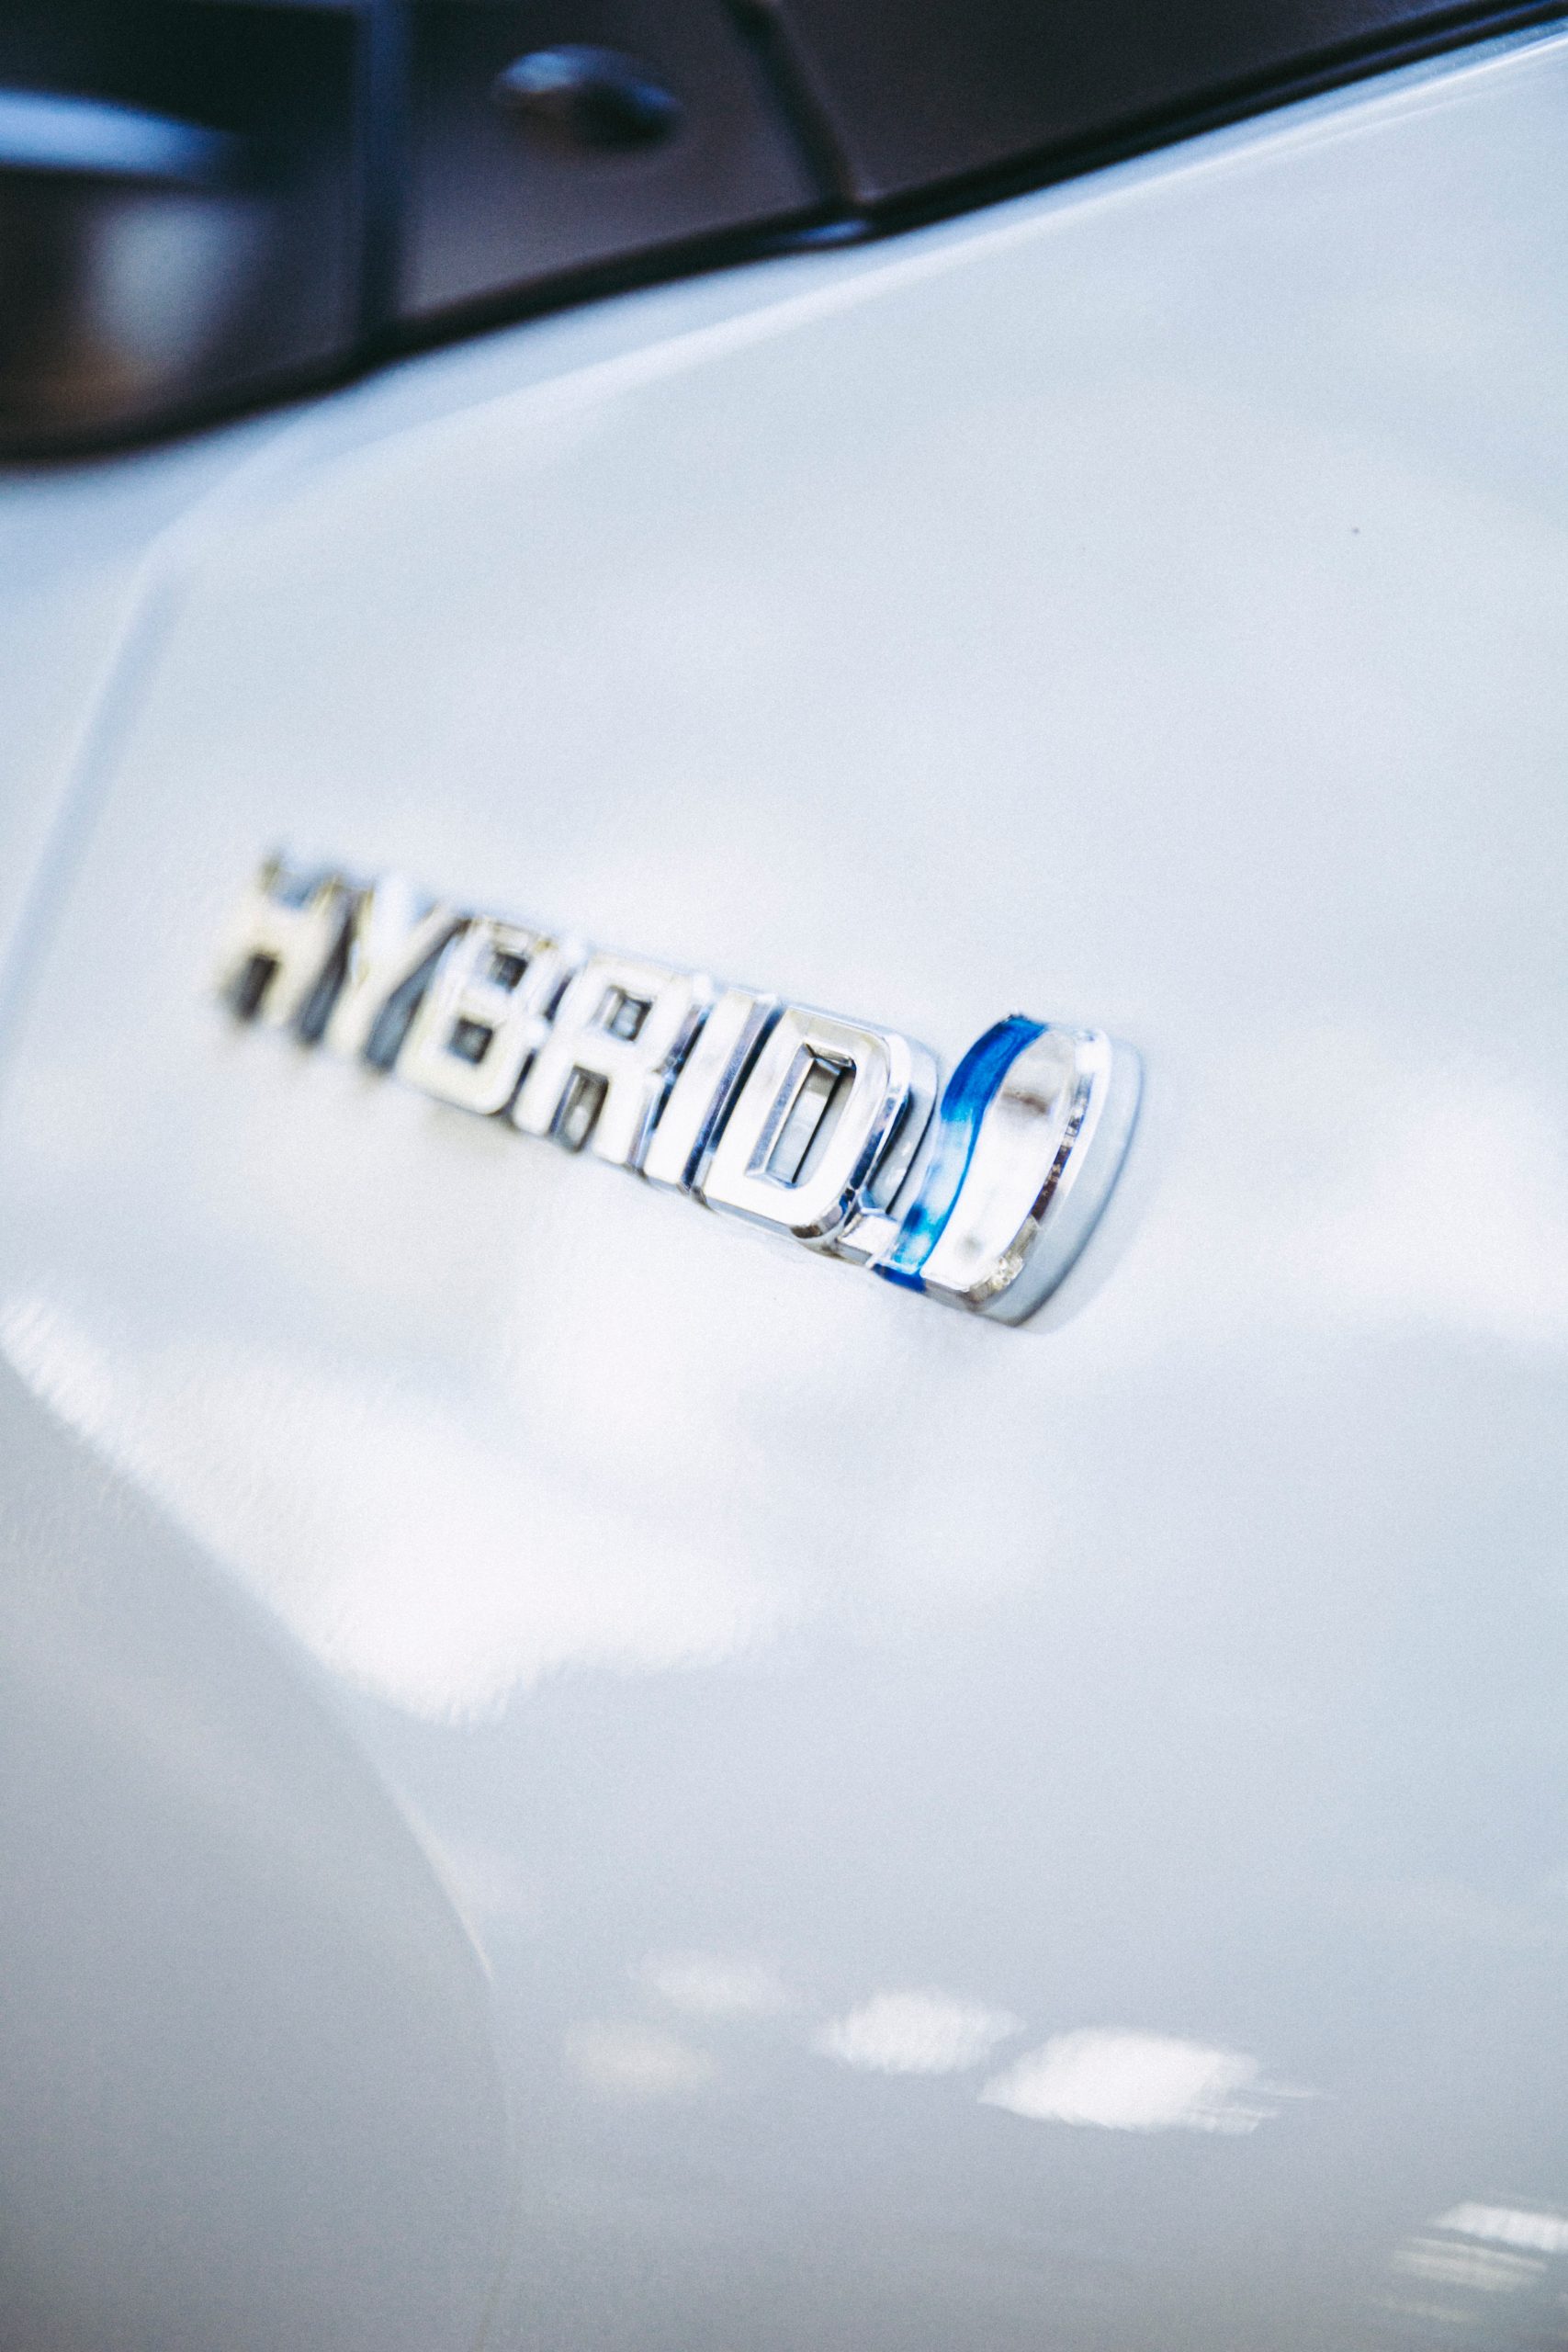 Are Hybrid Cars More Efficient Than Petrol Cars?